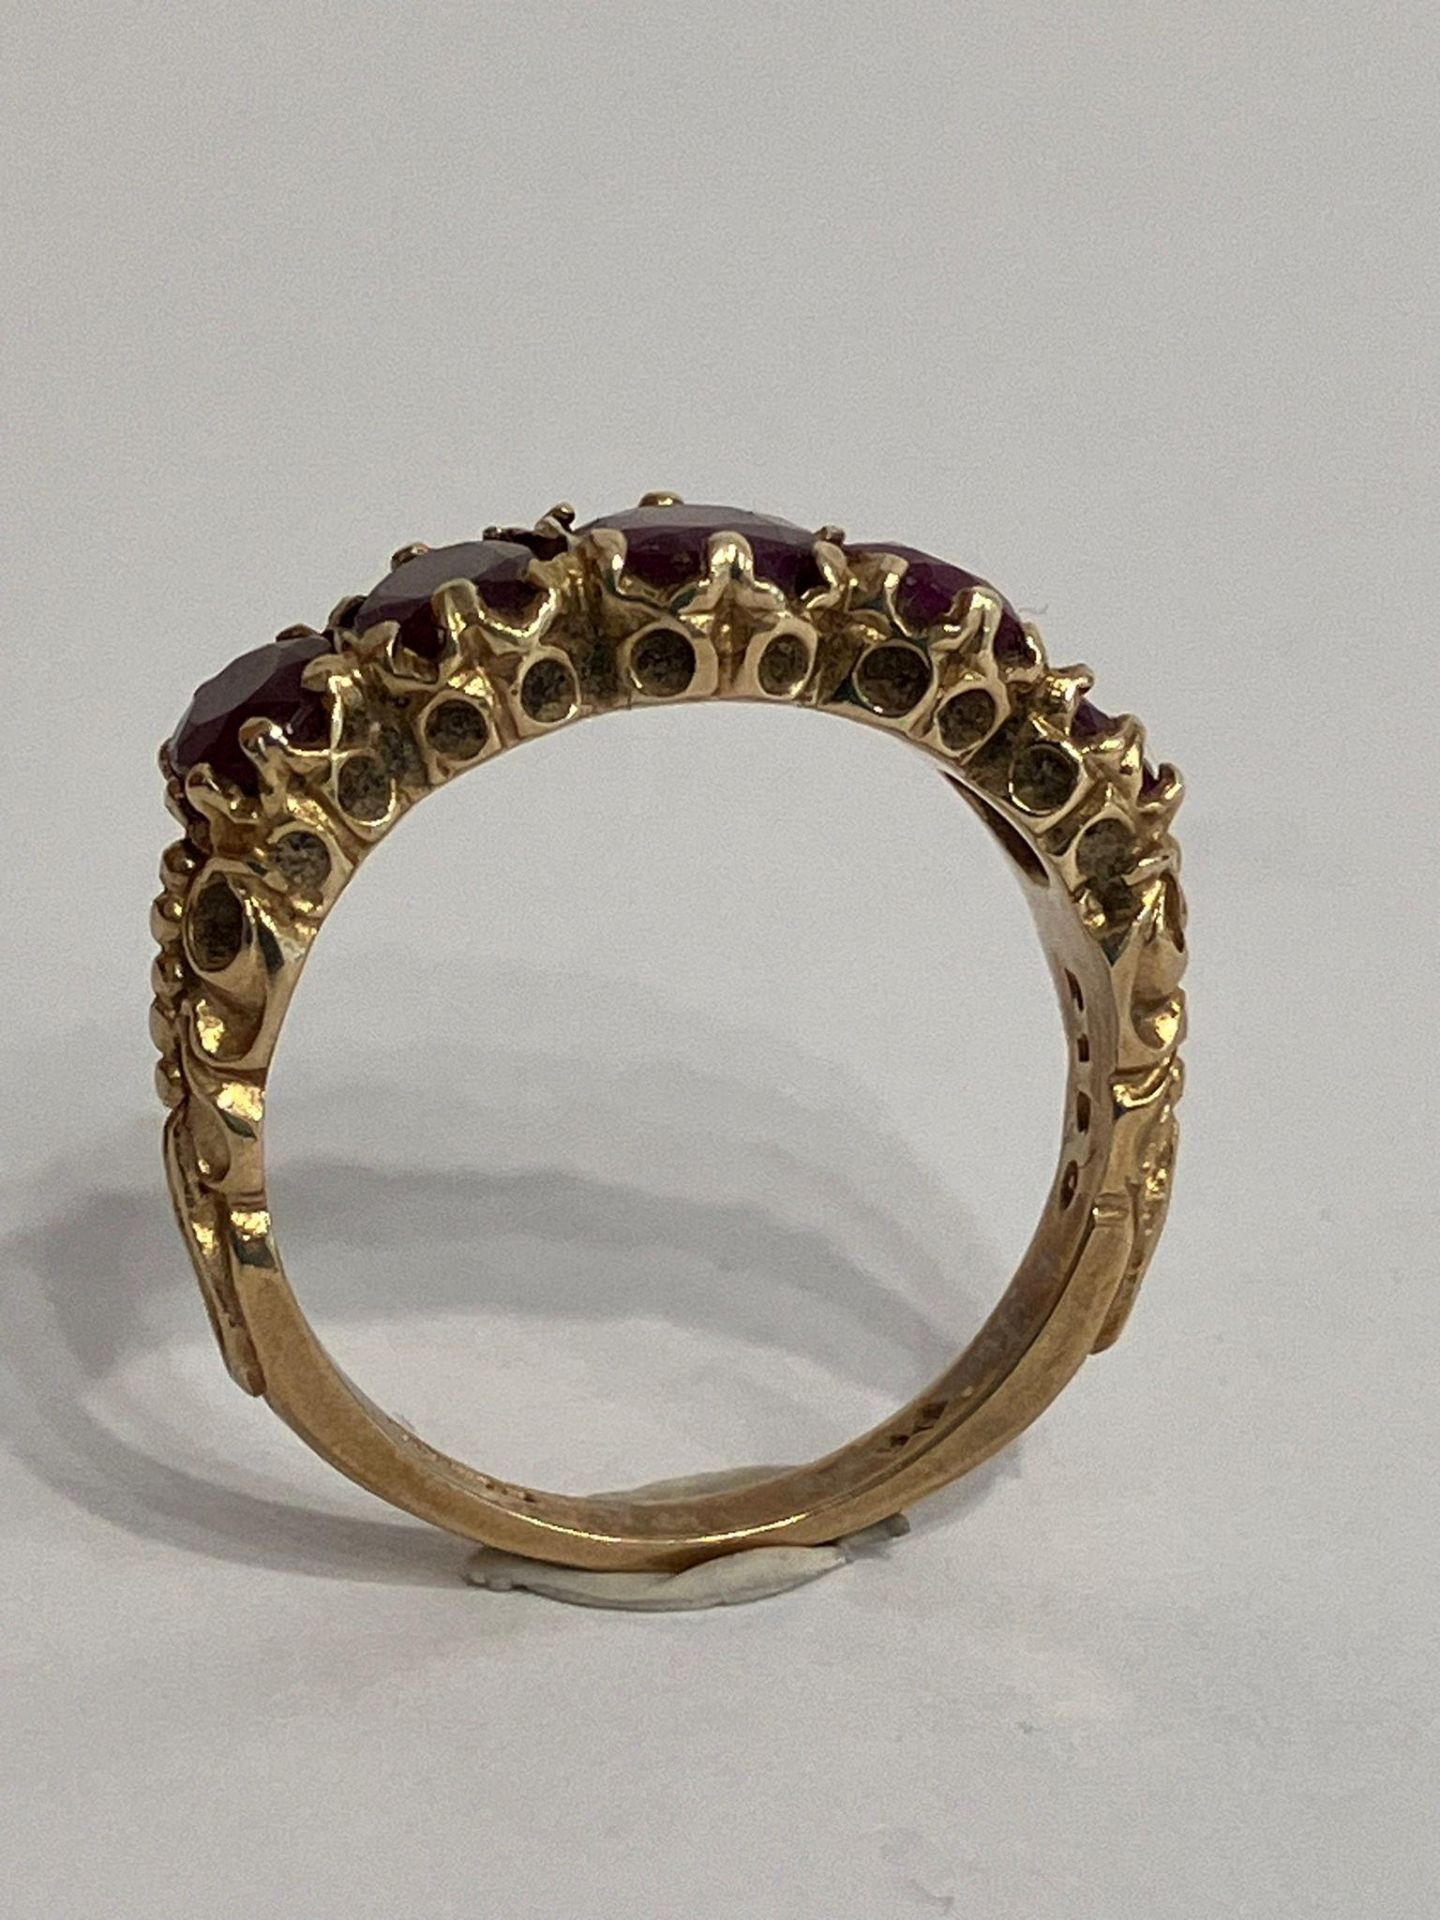 Magnificent 9 carat GOLD and AMETHYST RING. Consisting 5 x Graduated Oval Cut AMETHYSTS mounted to - Bild 2 aus 2